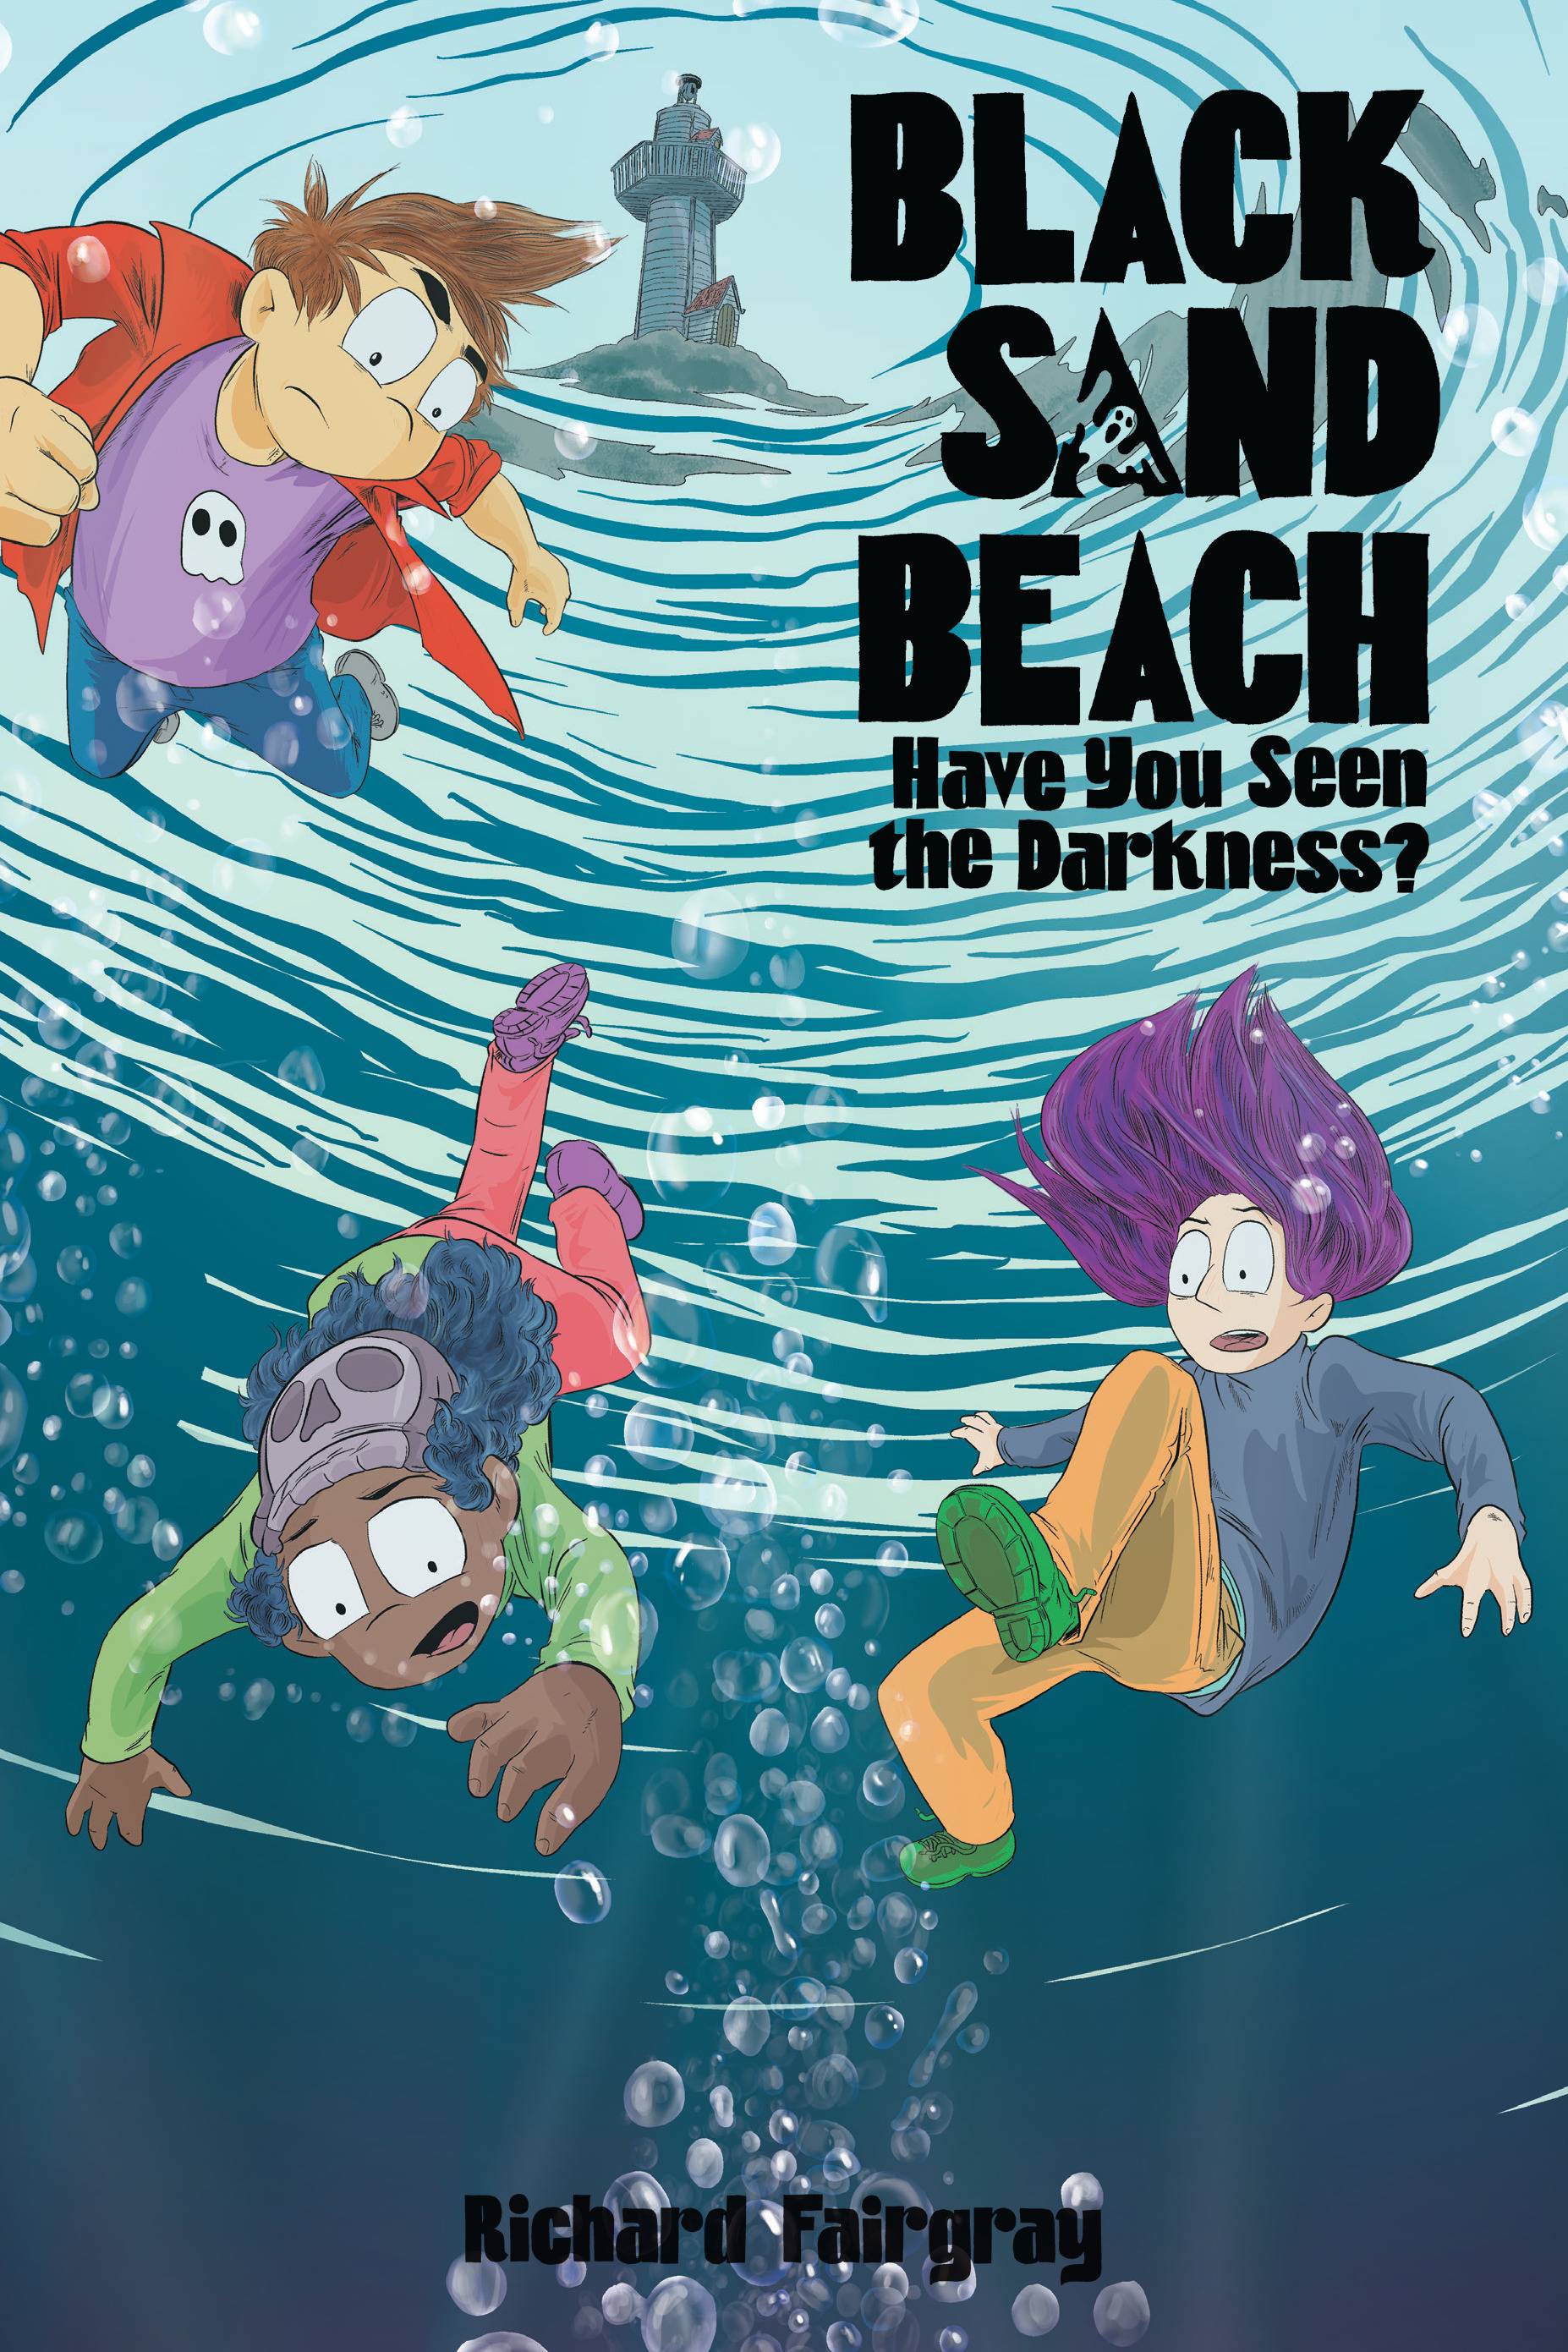 Black Sand Beach Hardcover Graphic Novel Volume 3 Have You Seen the Darkness?